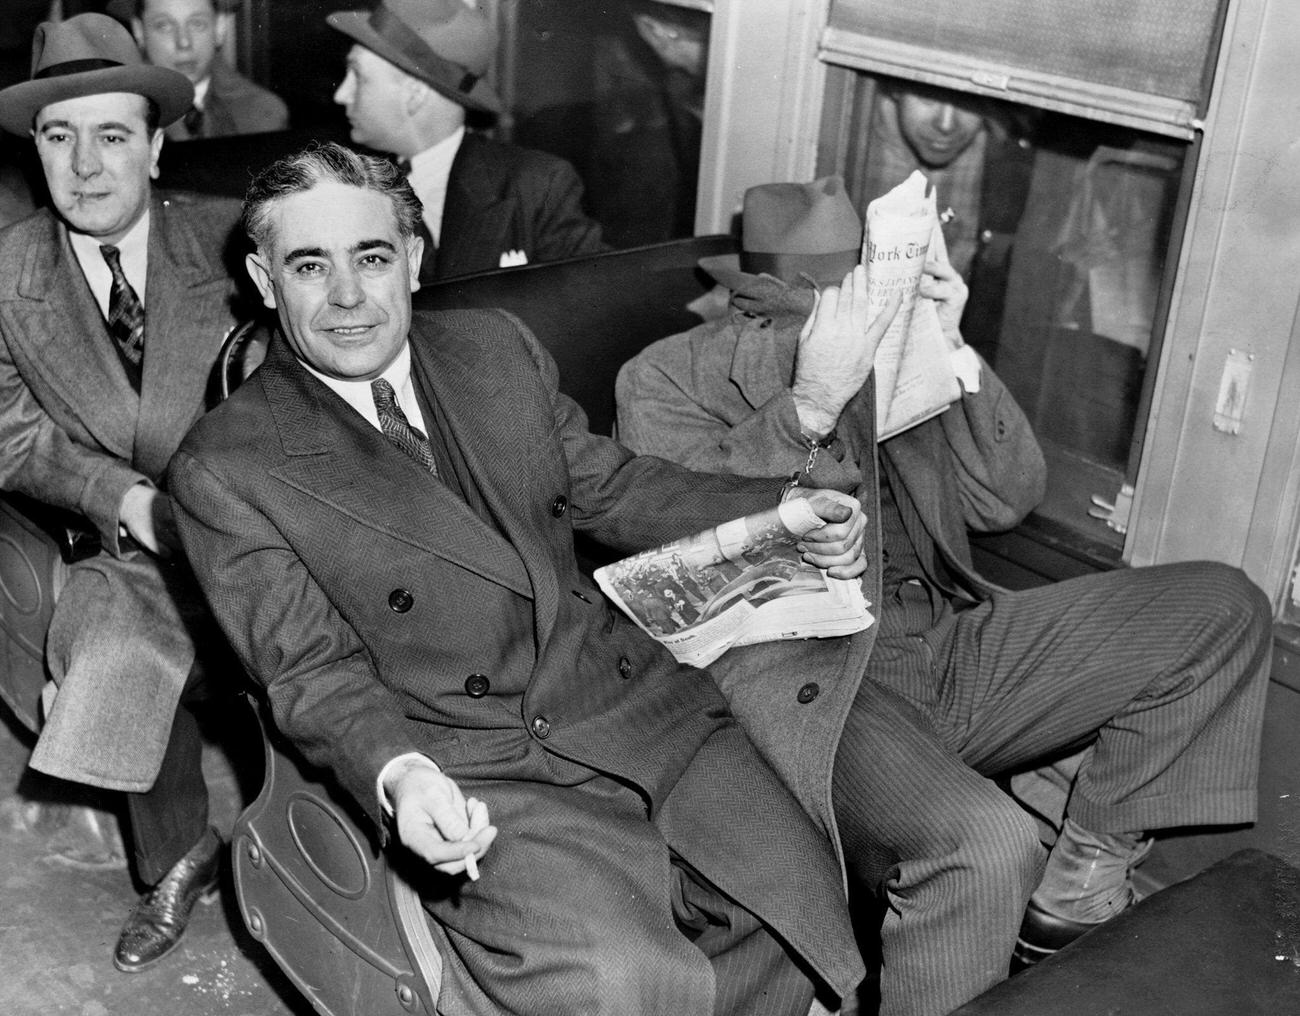 Surrounded by deputy sheriffs and shackled together, Emanuel (Mendy) Weiss, covering his face, and Louis Capone sit on the train en route to Sing Sing prison.